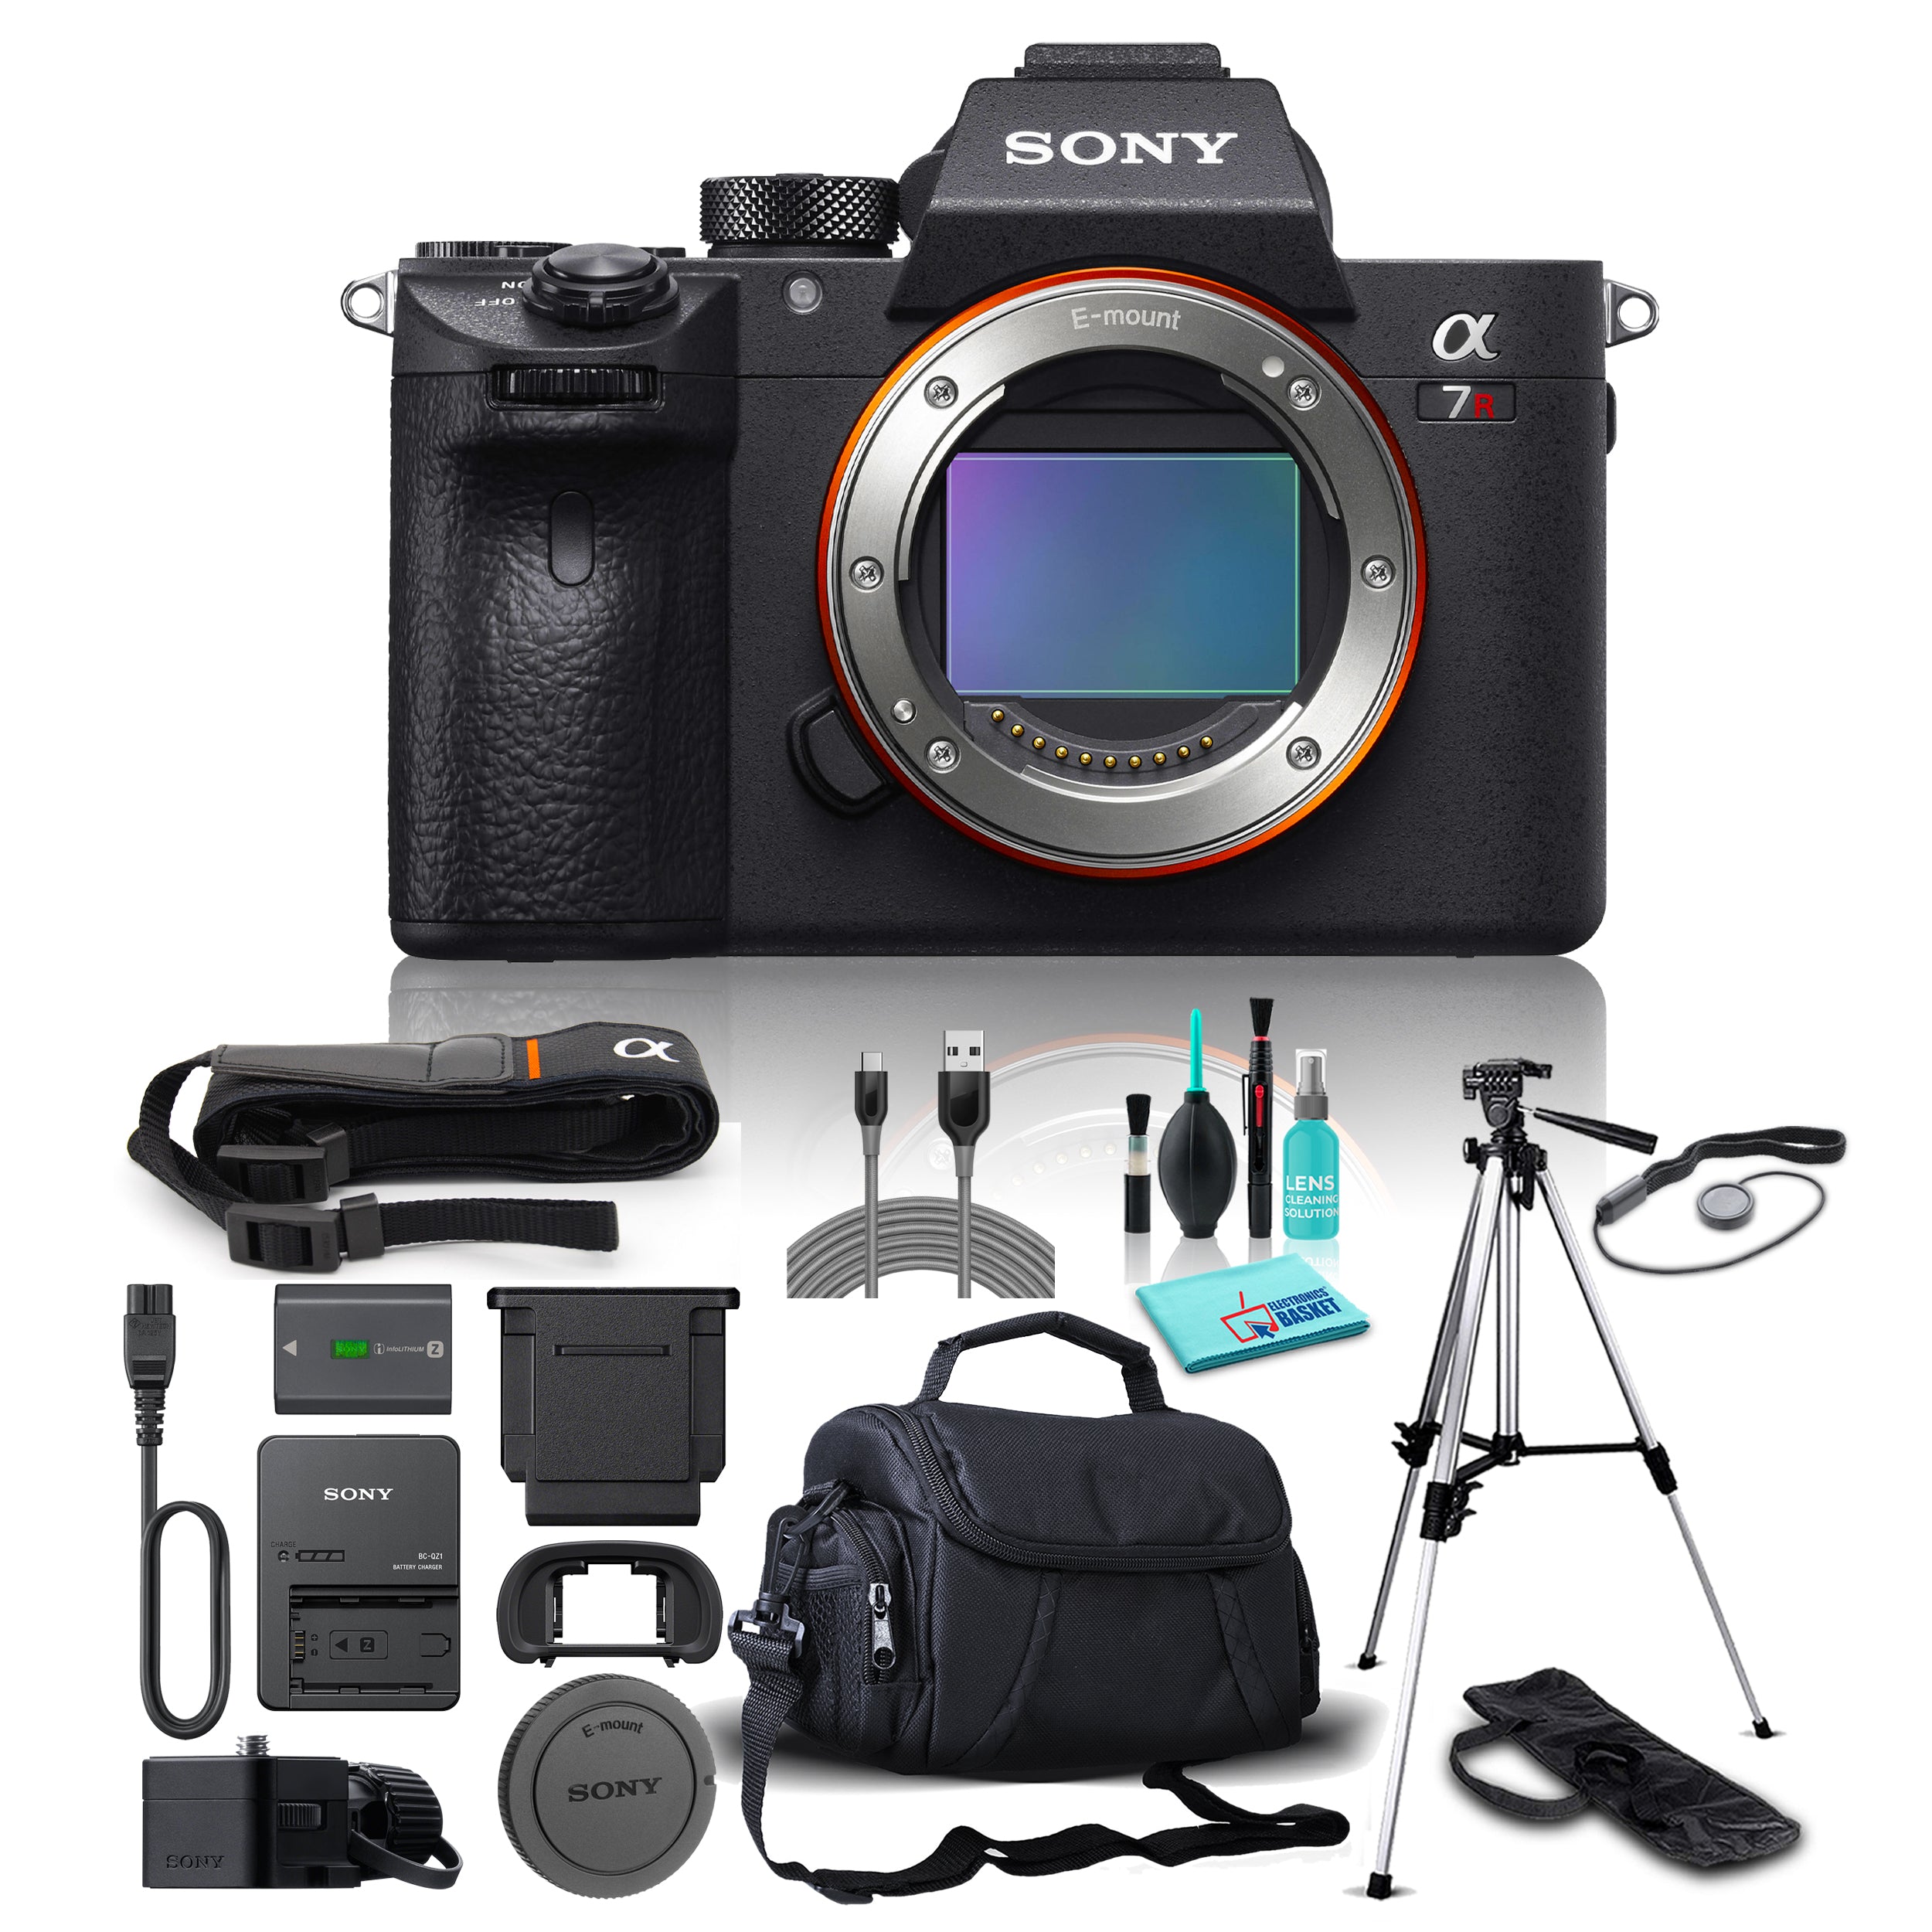 Sony Ultra 4K 42MP Full Frame Alpha a7R III Mirrorless Digital Camera and 5 Piece Accessories Bundle (Lens Not Included)